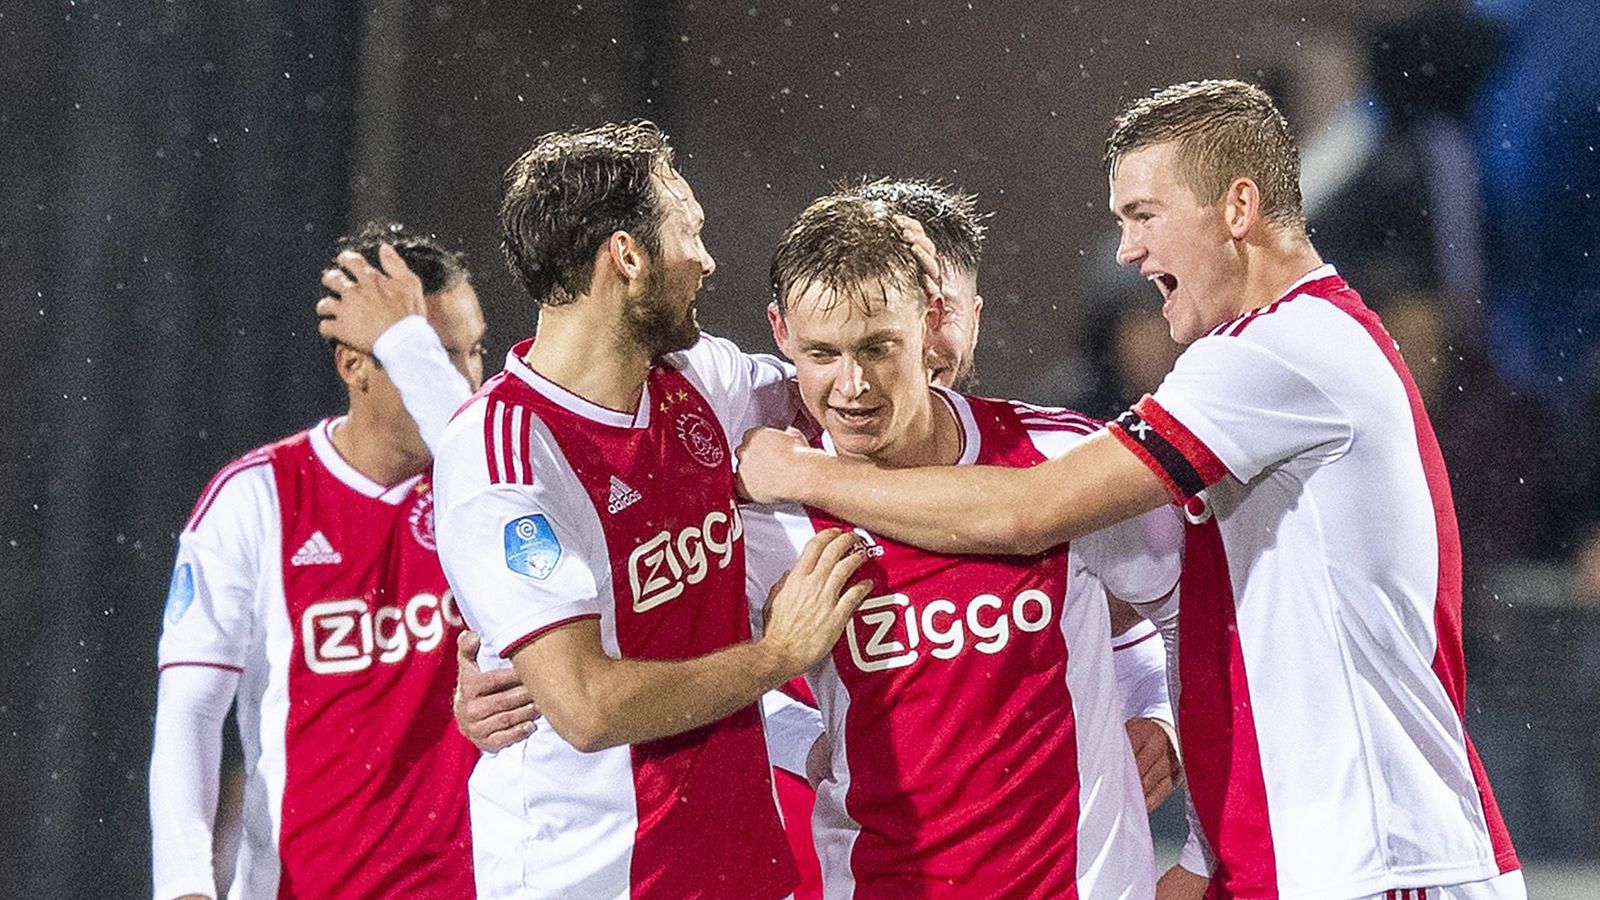 kiem Maan Oost Eredivisie round-up: Ajax move to within two points of PSV Eindhoven with  win over PEC Zwolle | Football News | Sky Sports